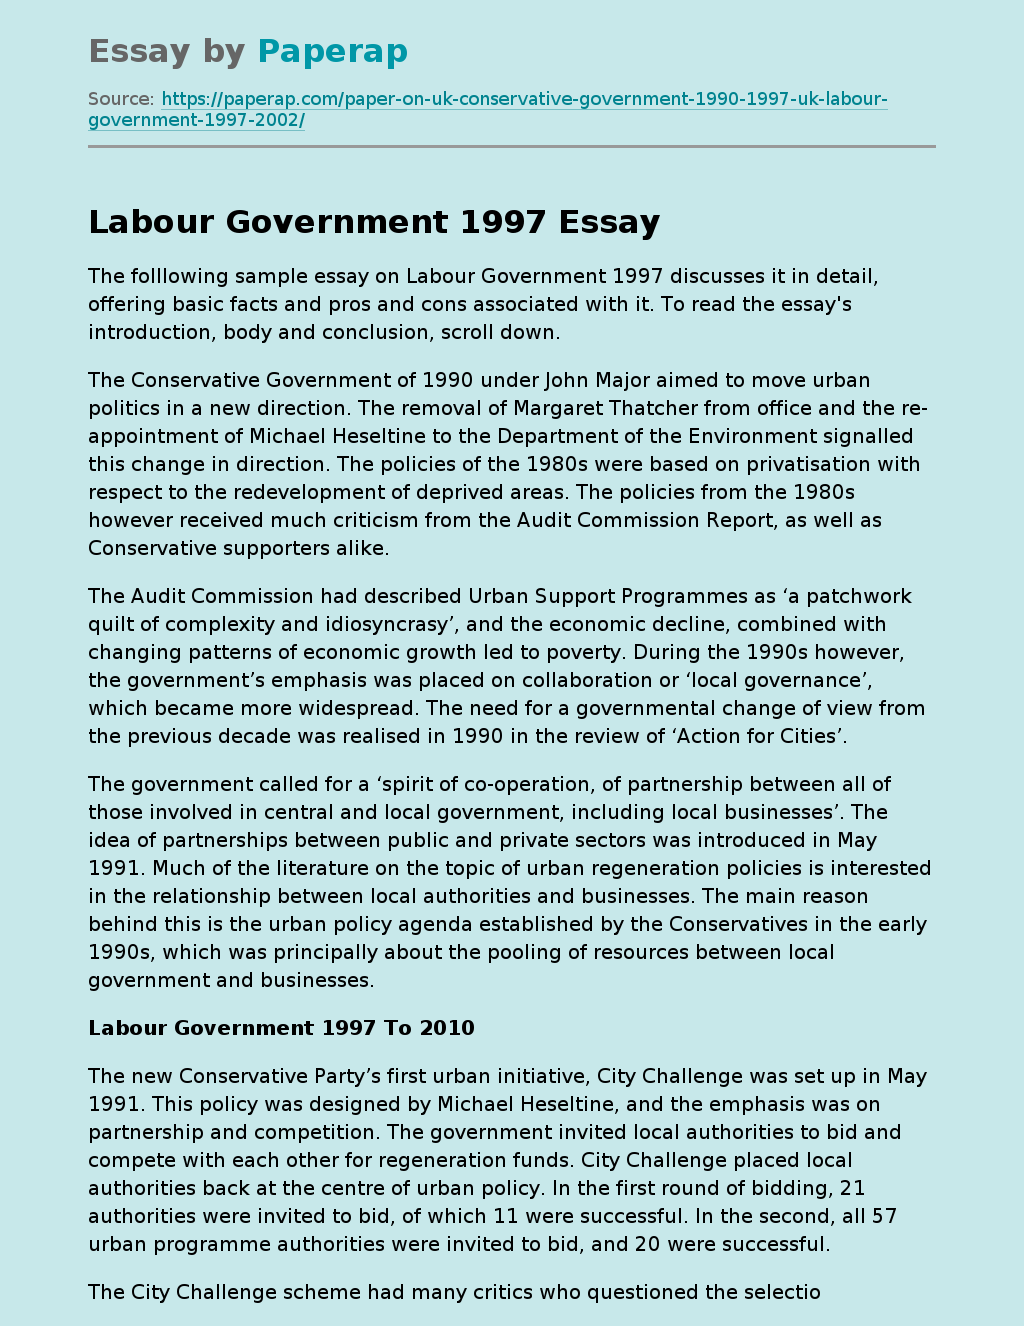 Labour Government 1997 To 2010